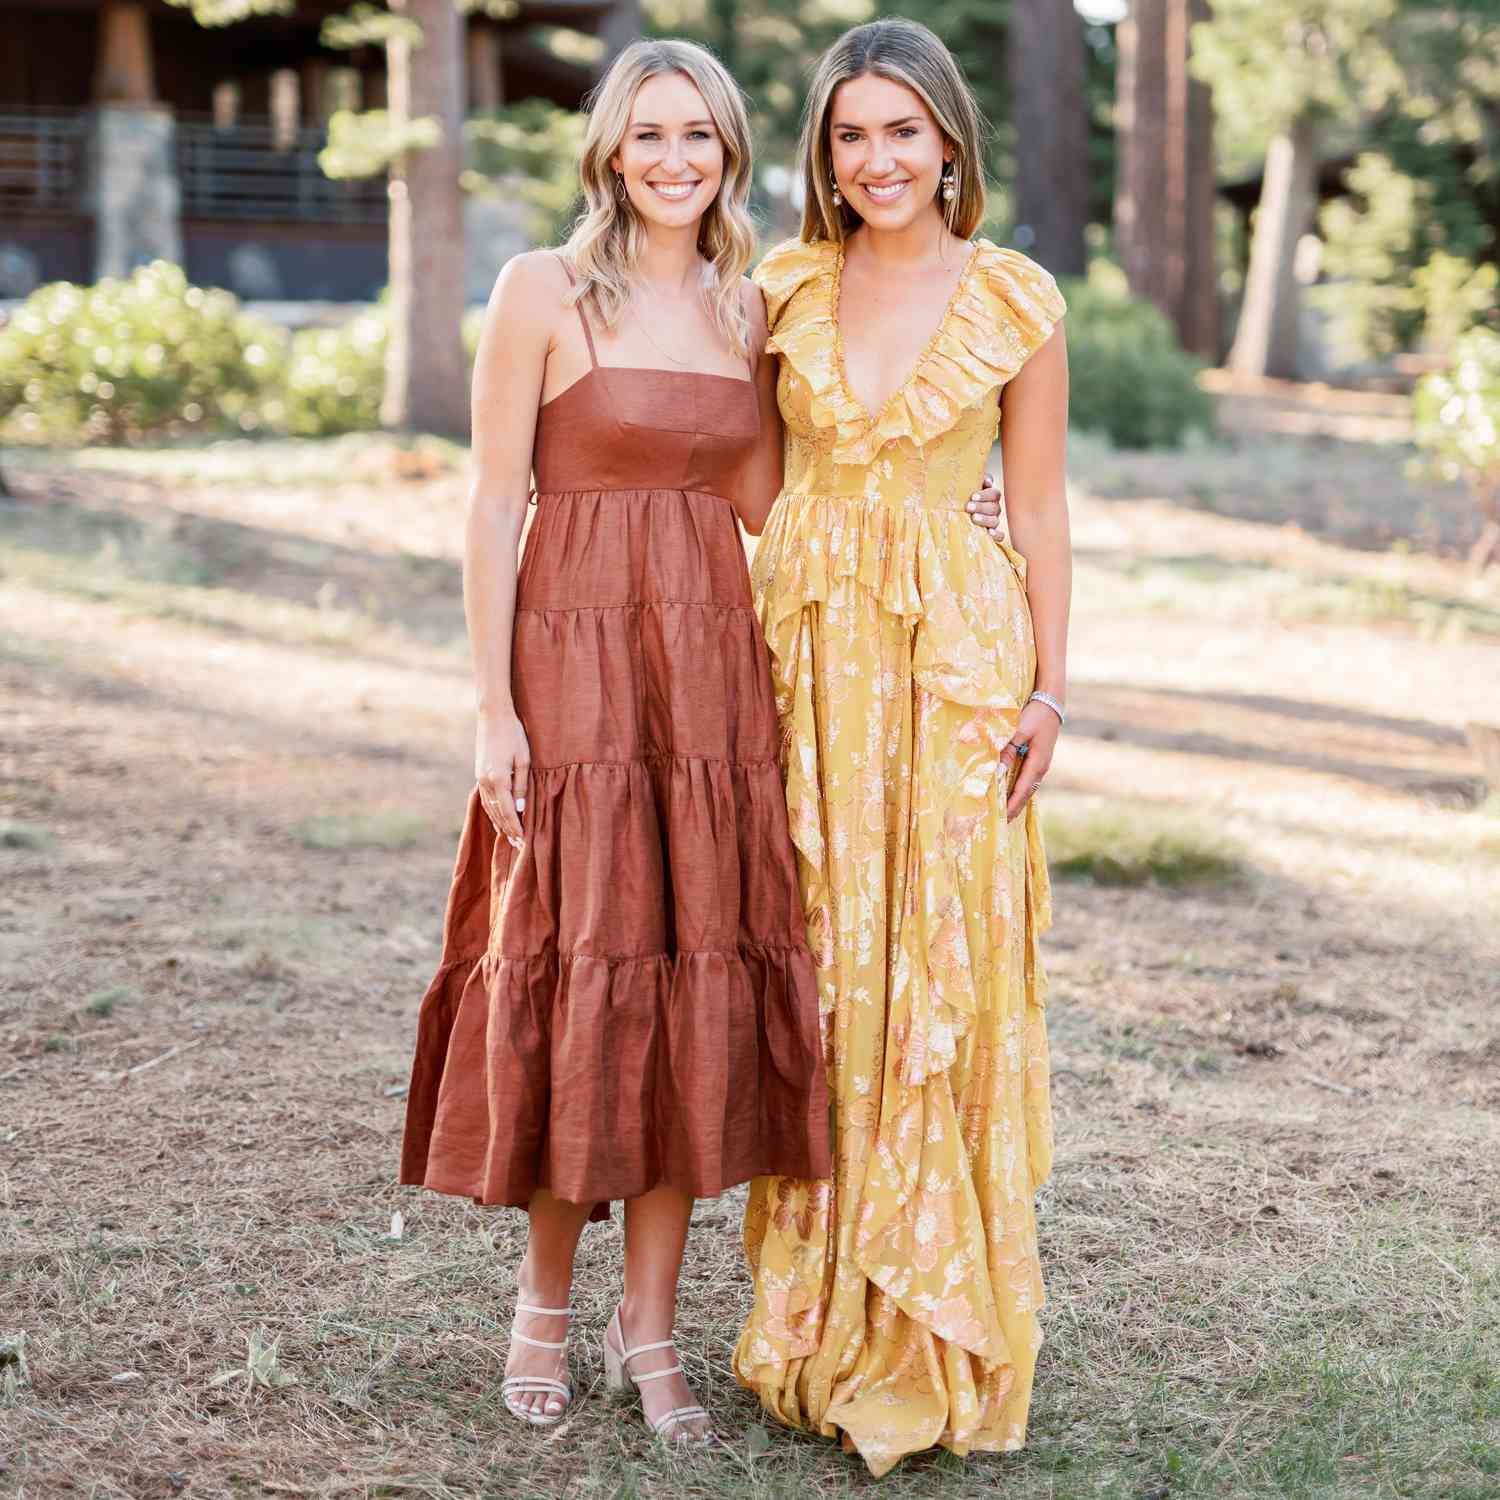 The Latest Trends in Ladies Midi Dresses for Weddings